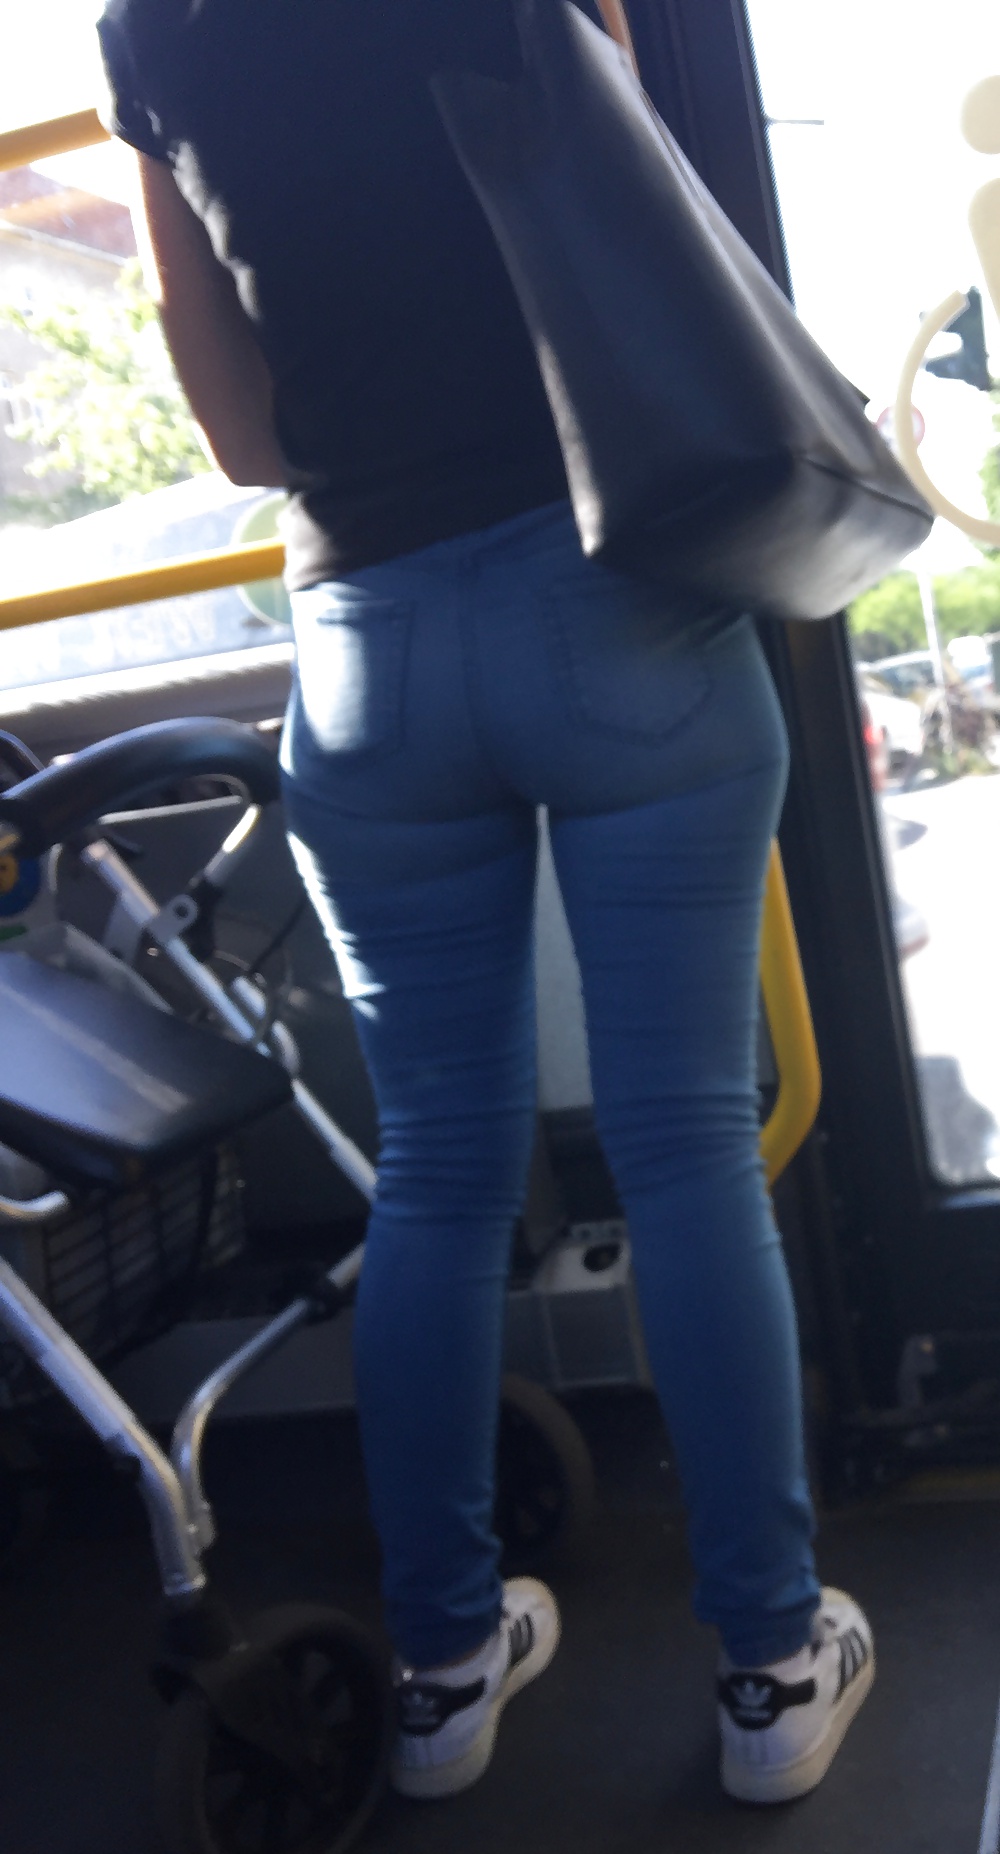 Sexy Ass in tight Jeans - Berlin Bus  (2/8)